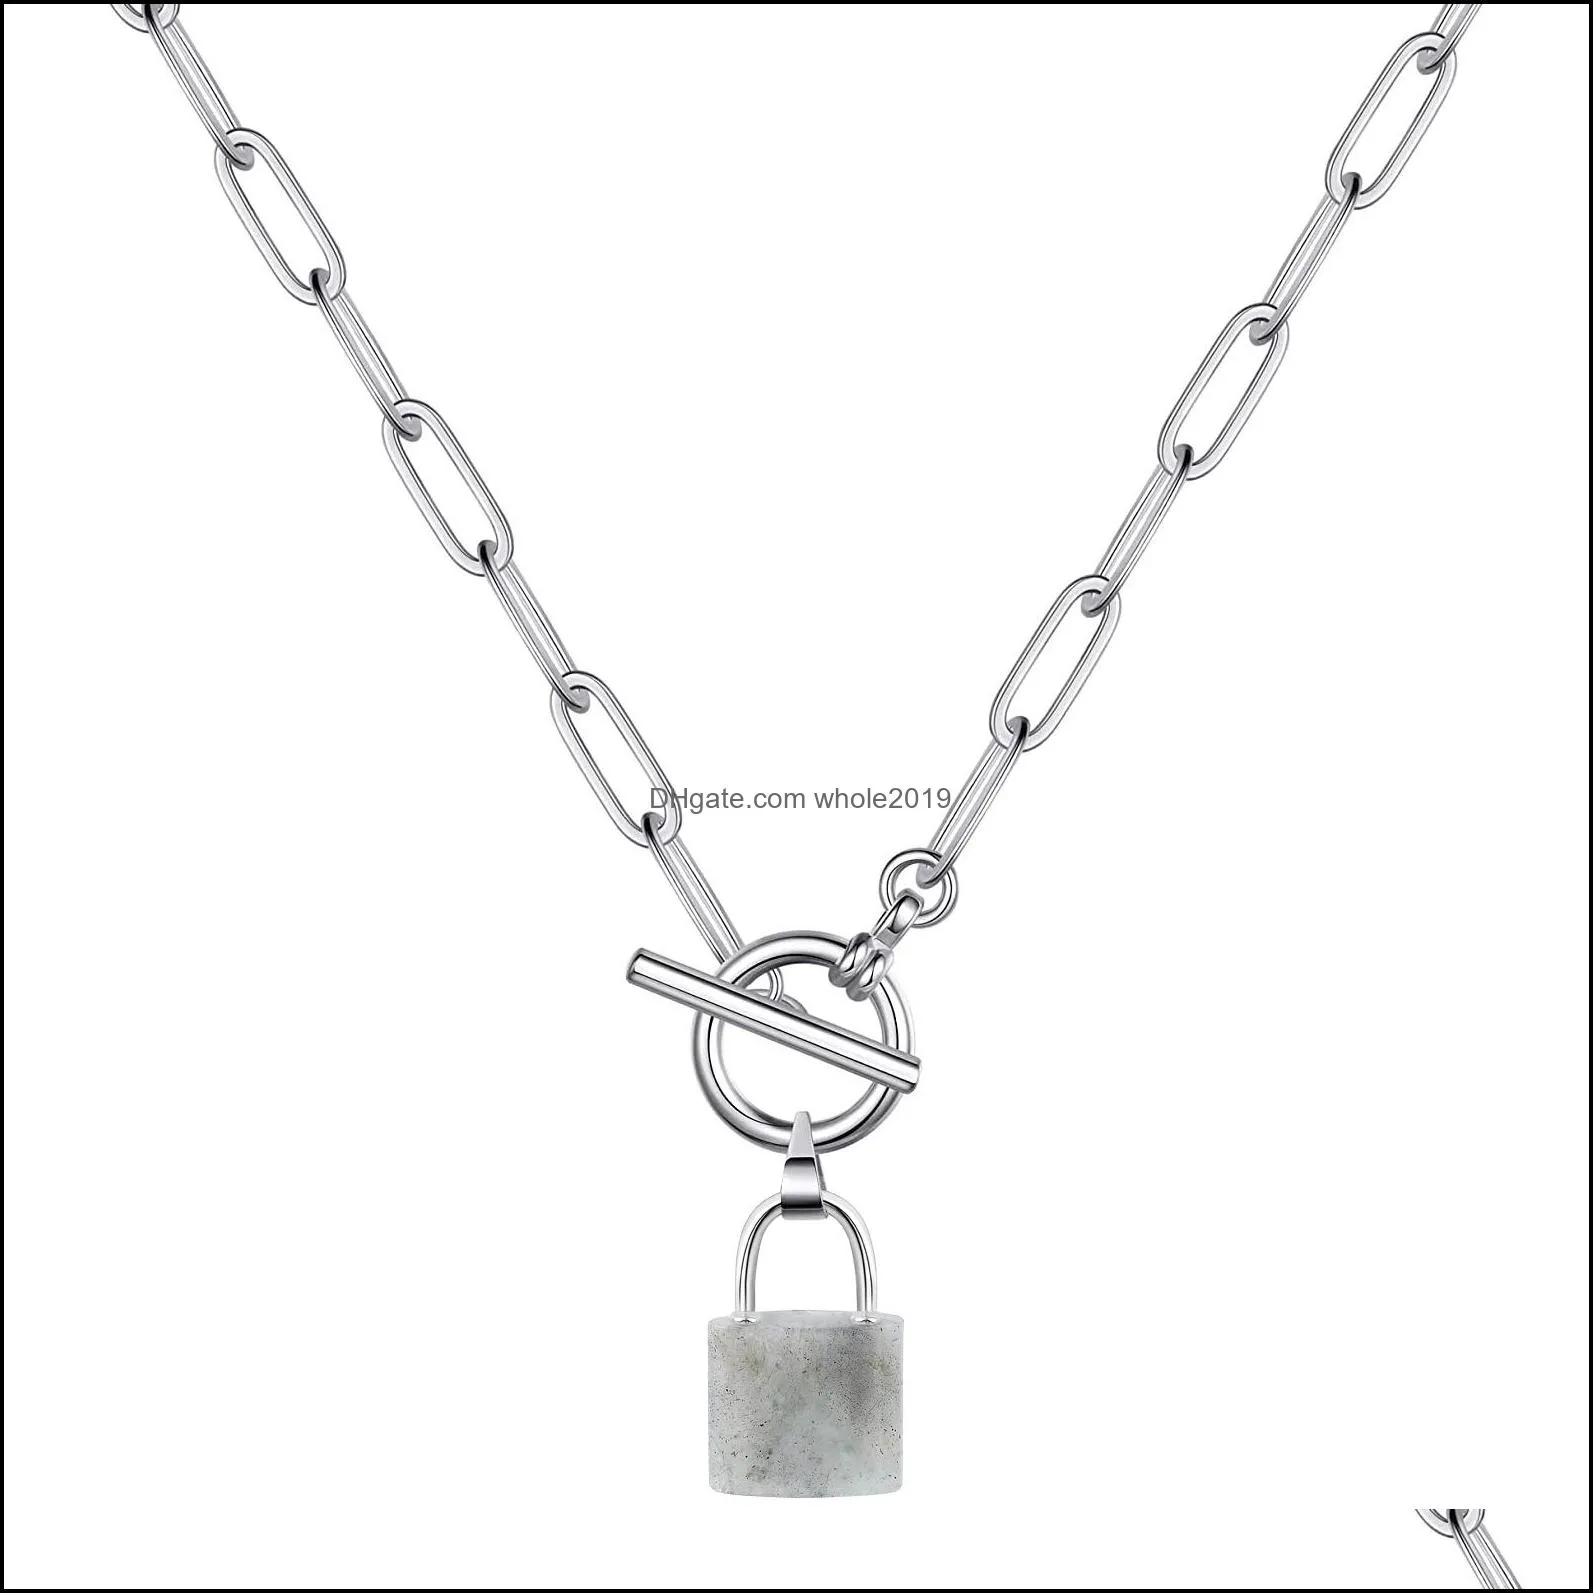 Chunky Punk Silver Chain Y Choker Cuban Link Statement Jewelry for Women and Girls Gemstone Lock Pendant Necklace IQ Clasp